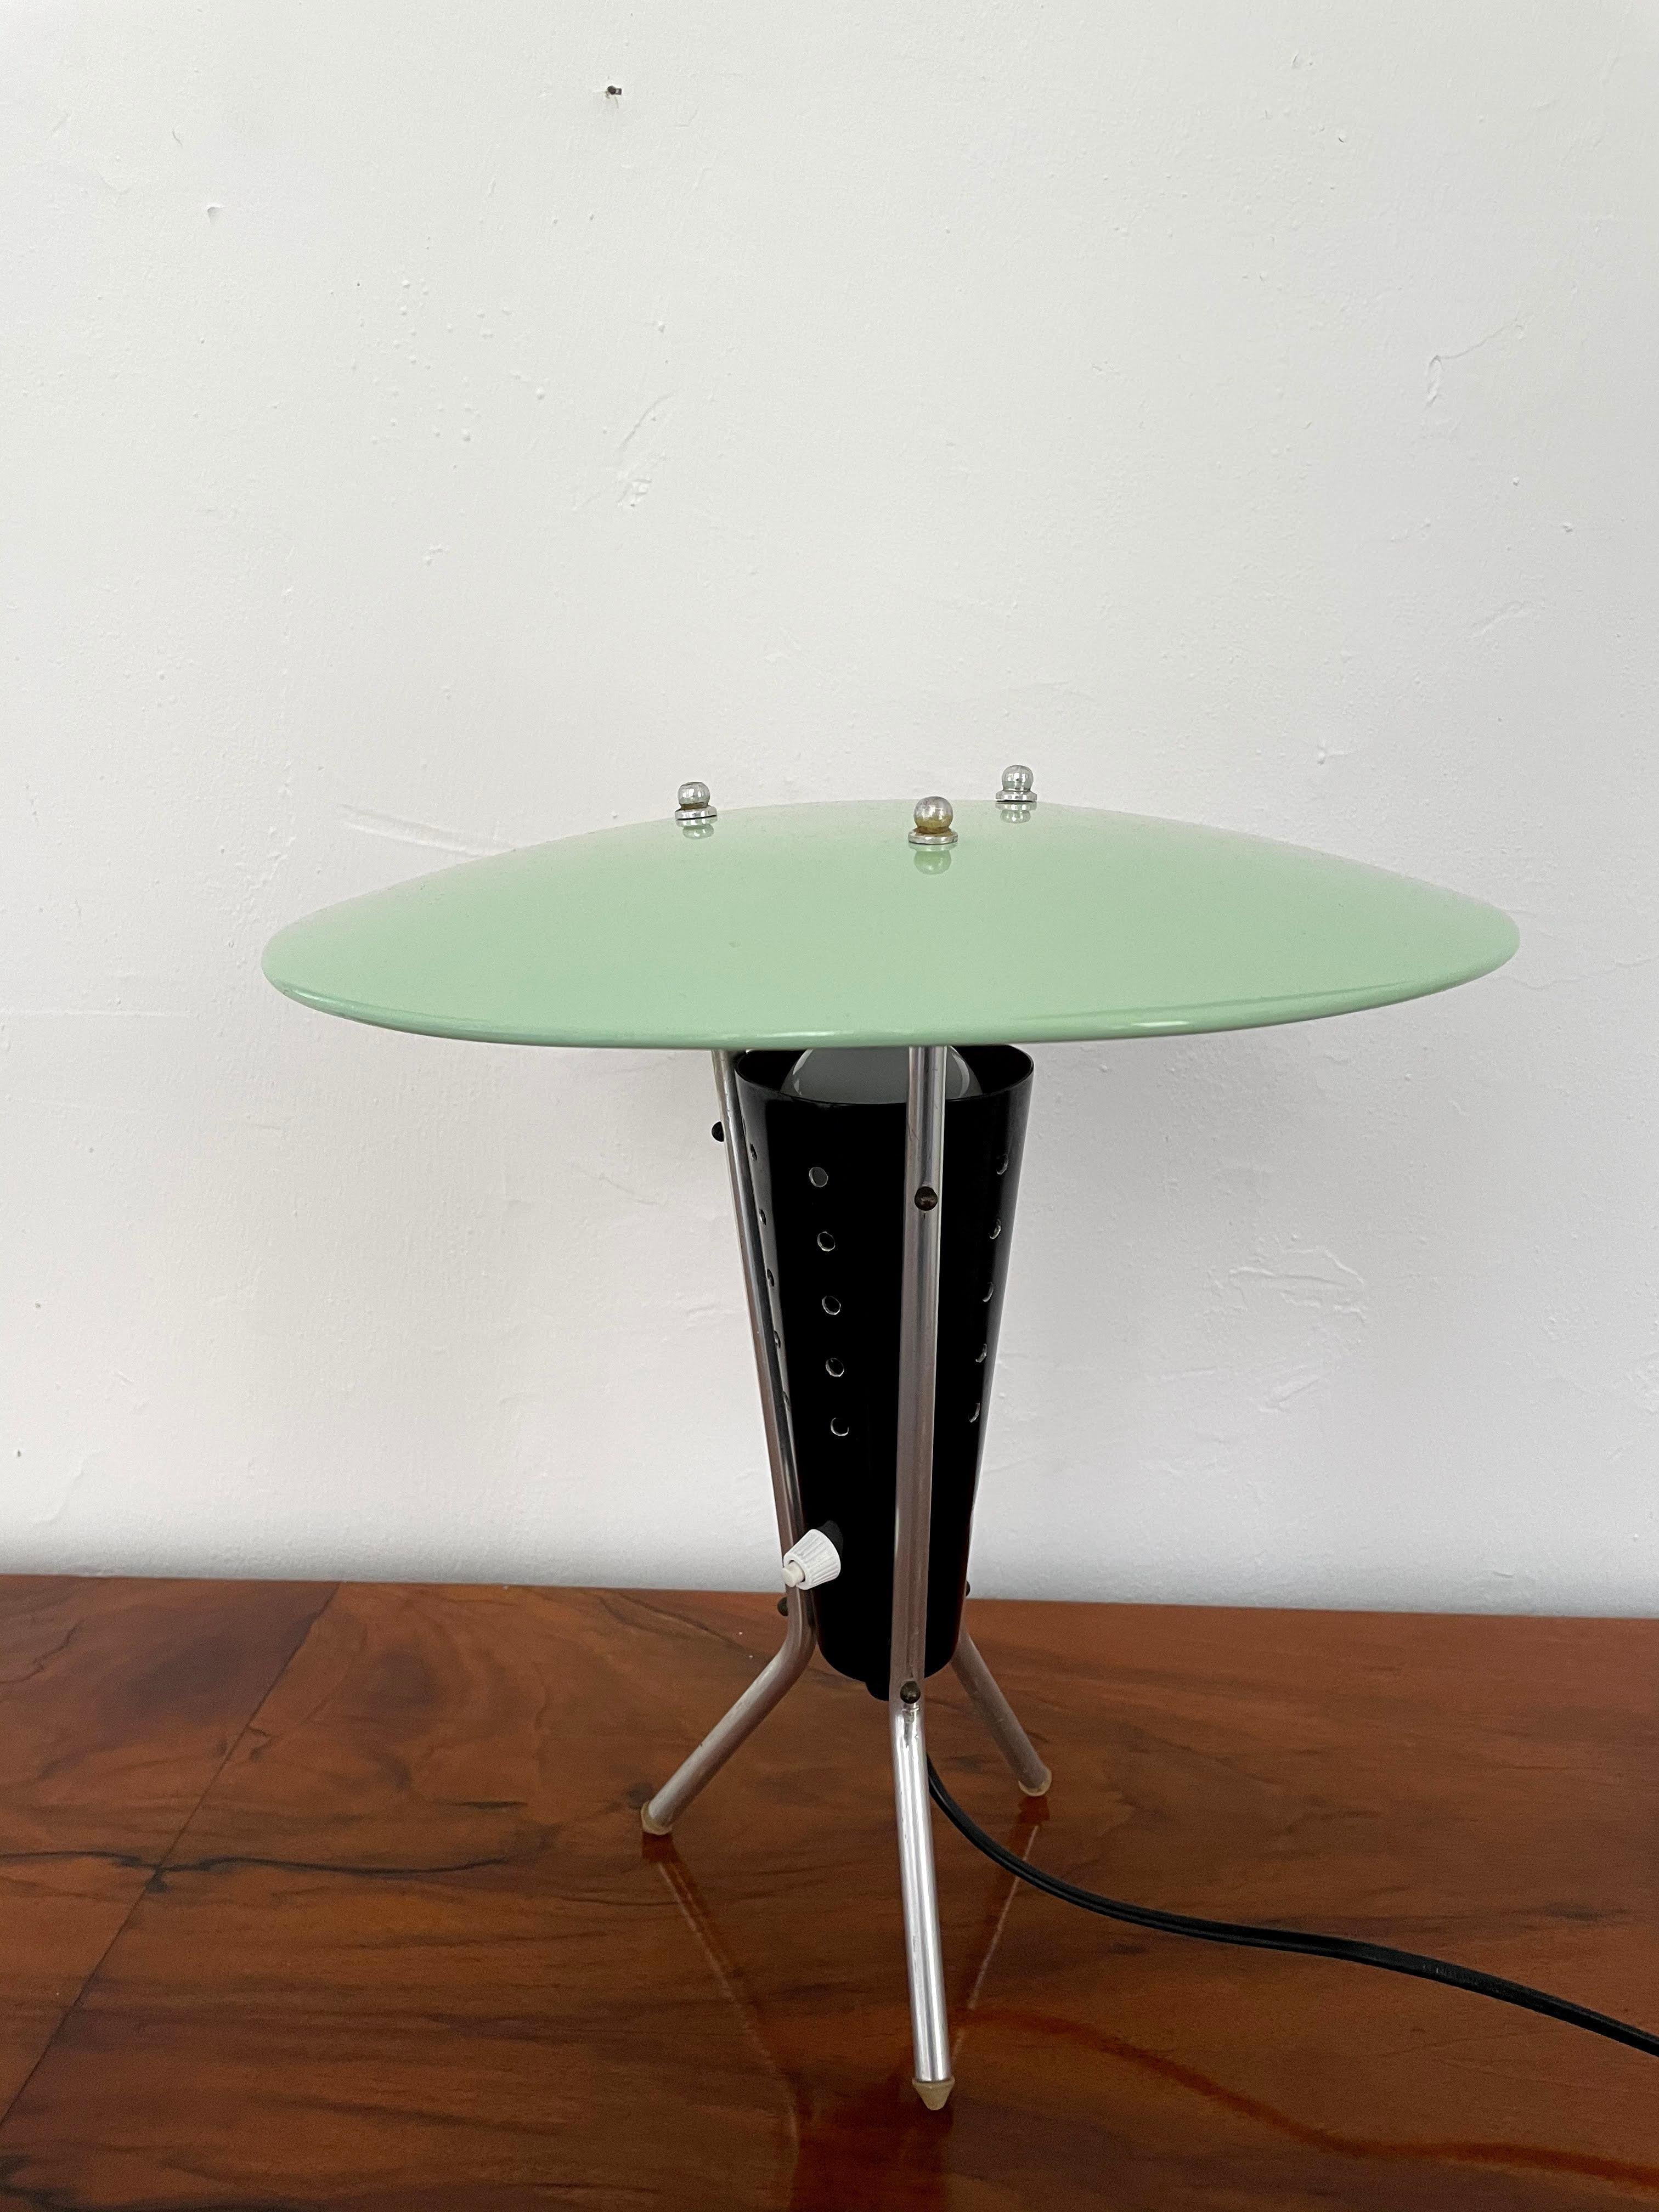 Stunning midcentury tripod table or desk lamp in brass and lacquered aluminium. The central black perforated cone houses the light source made soft indirect light. Very nice condition with a lovely patina and some loss of paint on the black cone.